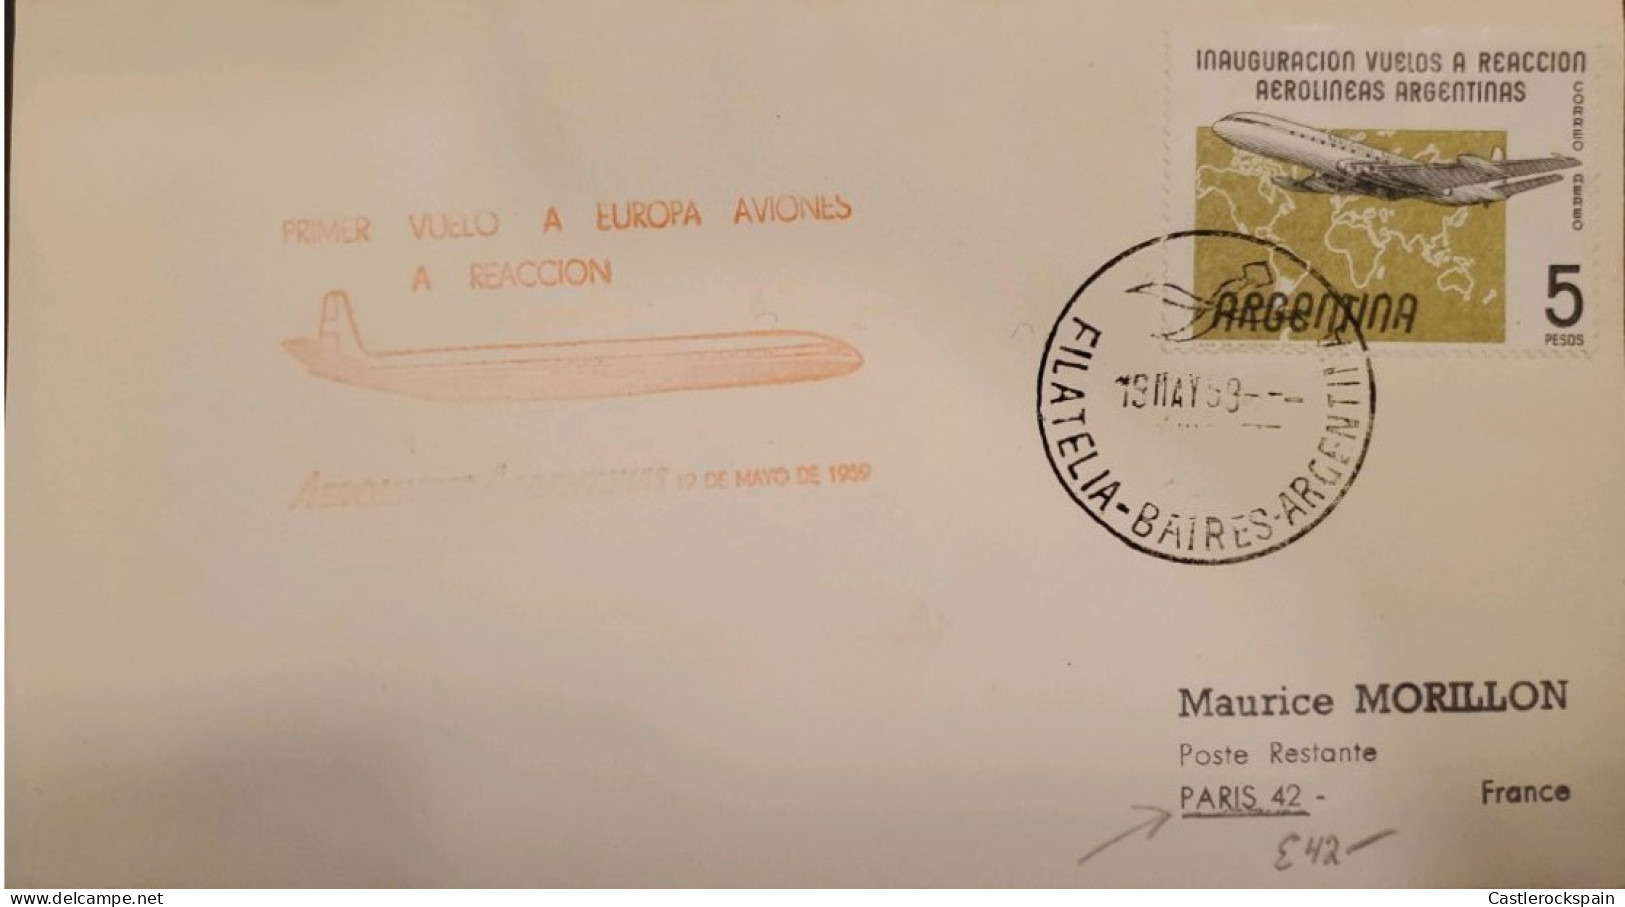 MI) 1958, ARGENTINA, FIRST FLIGHT TO EUROPE CANCELLATION, FROM BUENOS AIRES TO PARIS - FRANCE, AIR MAIL, XF - Used Stamps